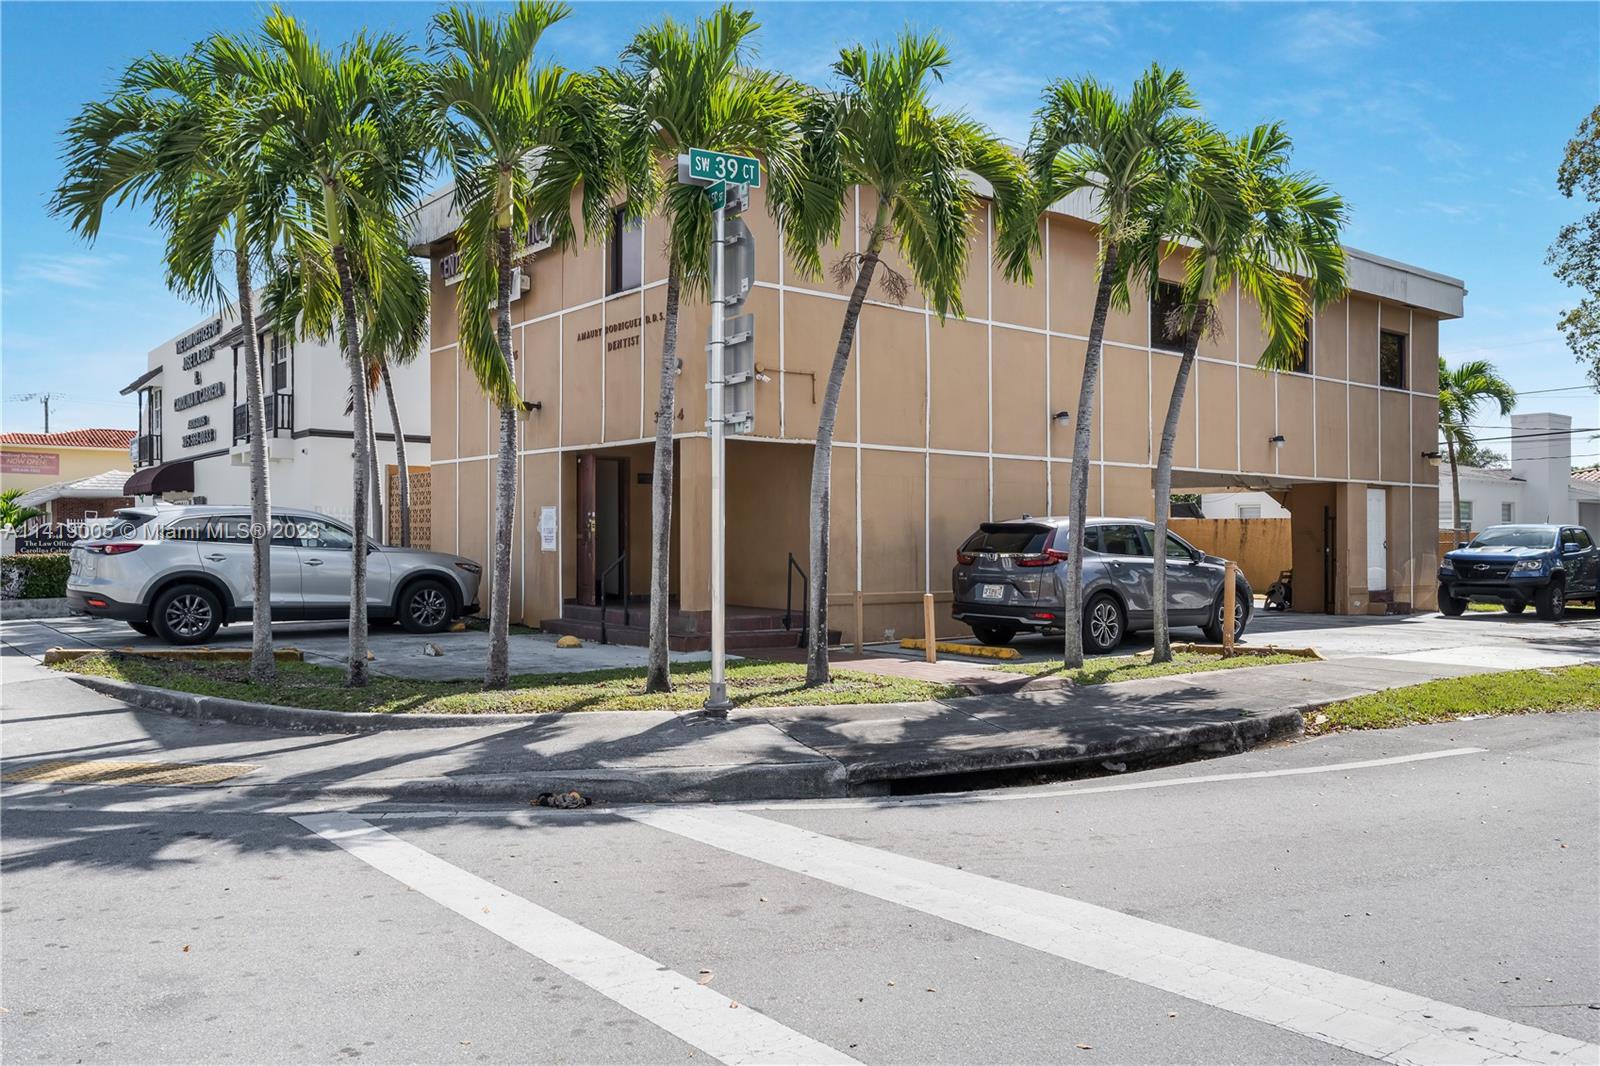 Splendid Dental Office Building is located in the Miami Central Business district near Miami Airport, Coral Gables,
Downtown Miami, and many retail amenities. This 2 story office bldg is currently operating as a Dental Office that offers Reception area/Lobby, Kitchen, Patient & private bathrms, Client Files Storage rm, Dental Laboratory rm,XRay/Development rm, 3 Dental completely plumbed ready patient rms, 10 covered & open parking spaces on premises, & more. Roof-2013, A/C-2022, complete security/camera system (interior/exterior). Sale includes all office furnishings, all dental equipment/inventory, 50+ year dental client base. Office location has Flagler St traffic w/ thousands of vehicular daily traffic. Ideal location for legal,financial, insurance & many other businesses.